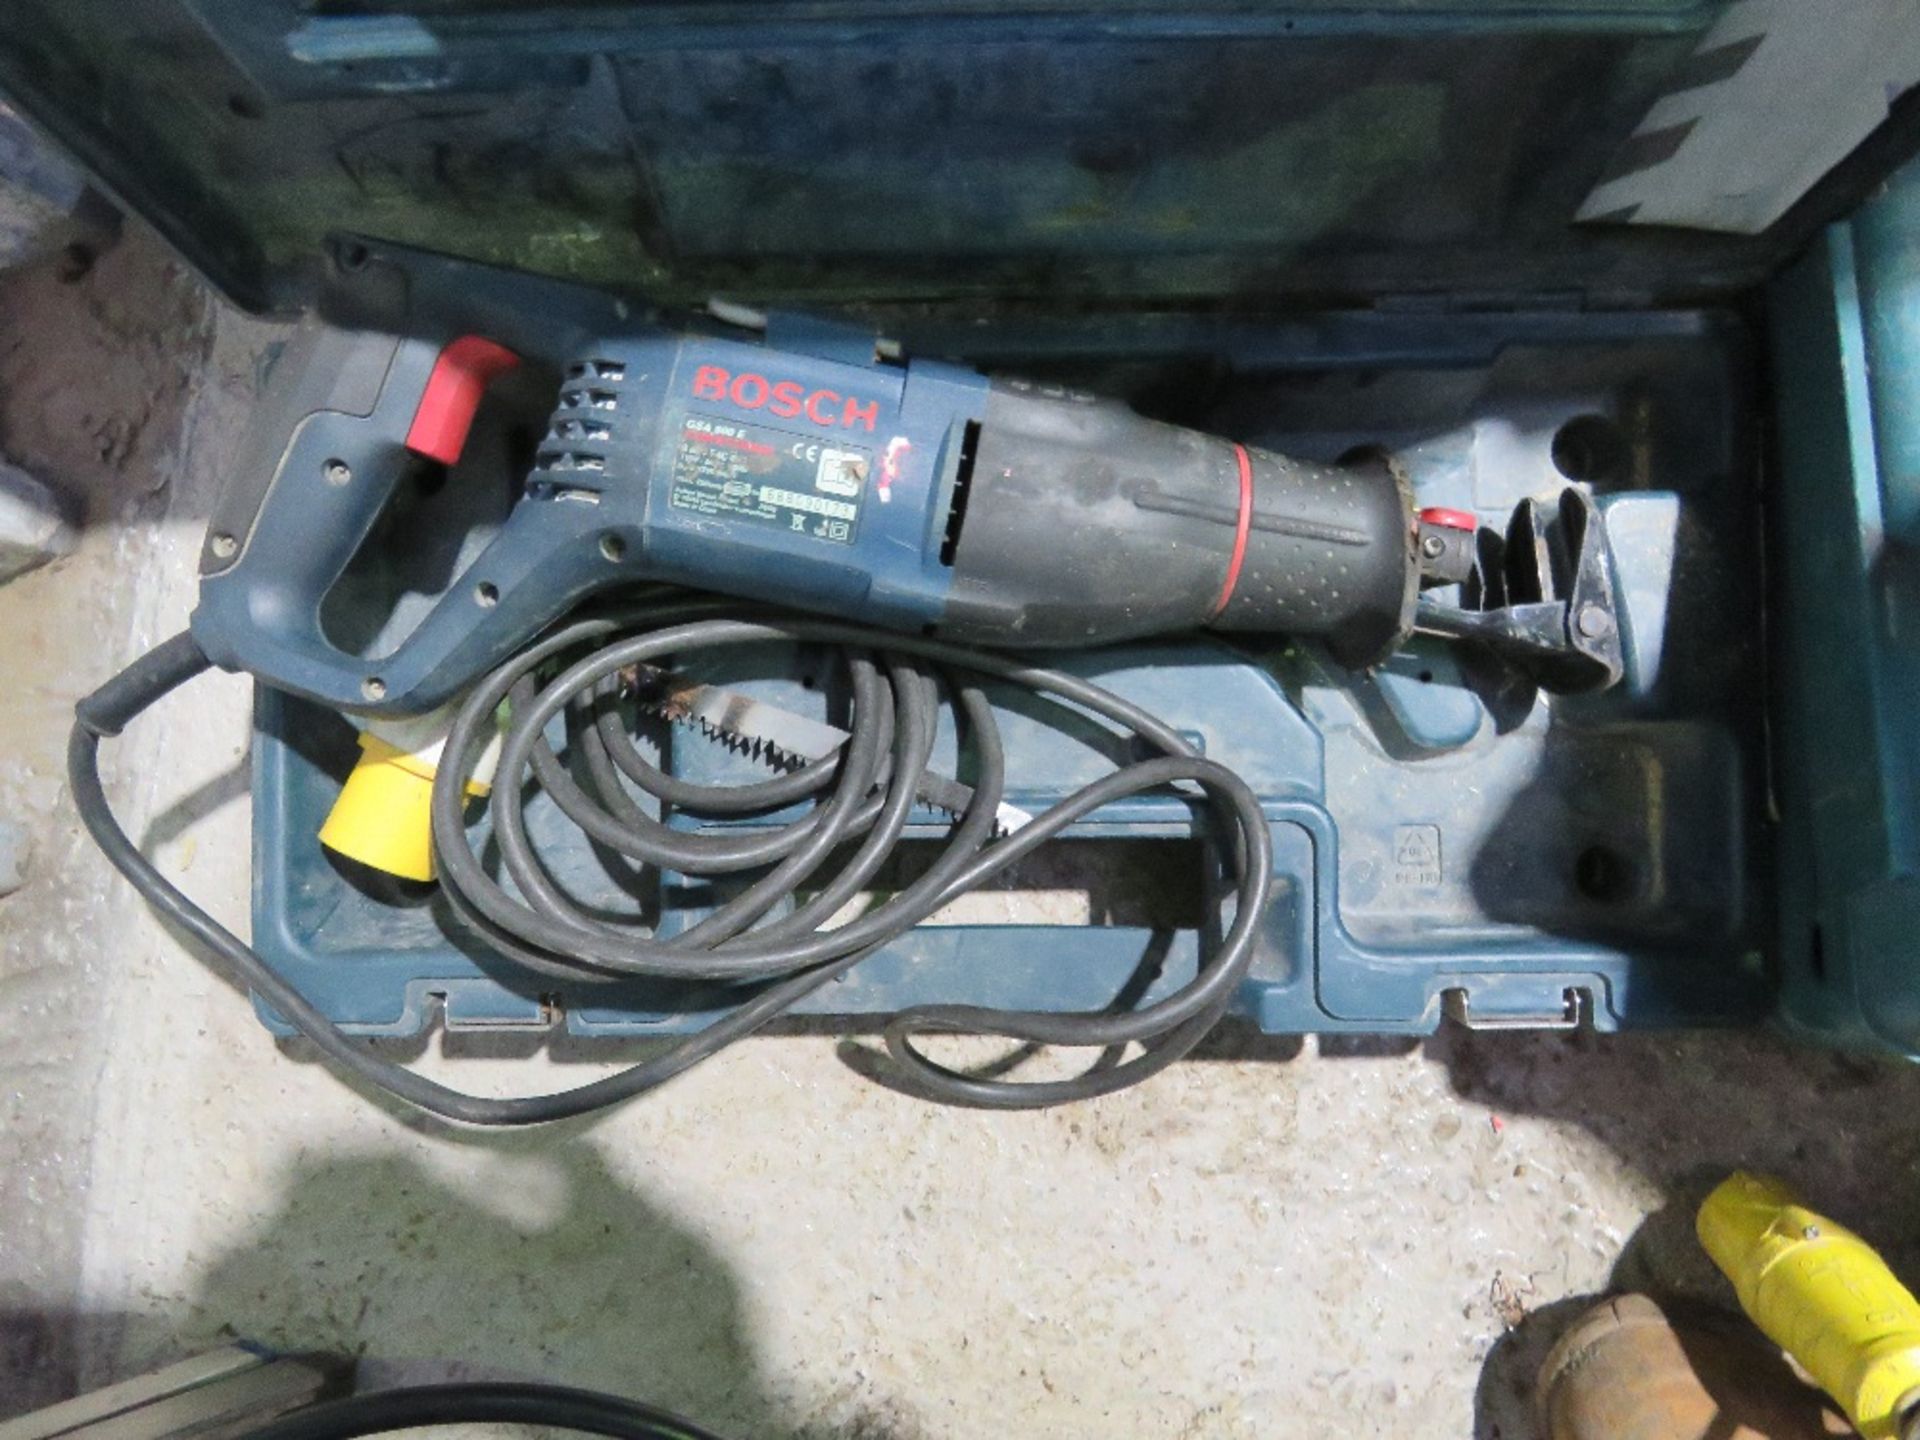 SKIL 110VOLT CIRCULAR SAW PLUS A BOSCH RECIP SAW. THIS LOT IS SOLD UNDER THE AUCTIONEERS MARGIN S - Image 5 of 5